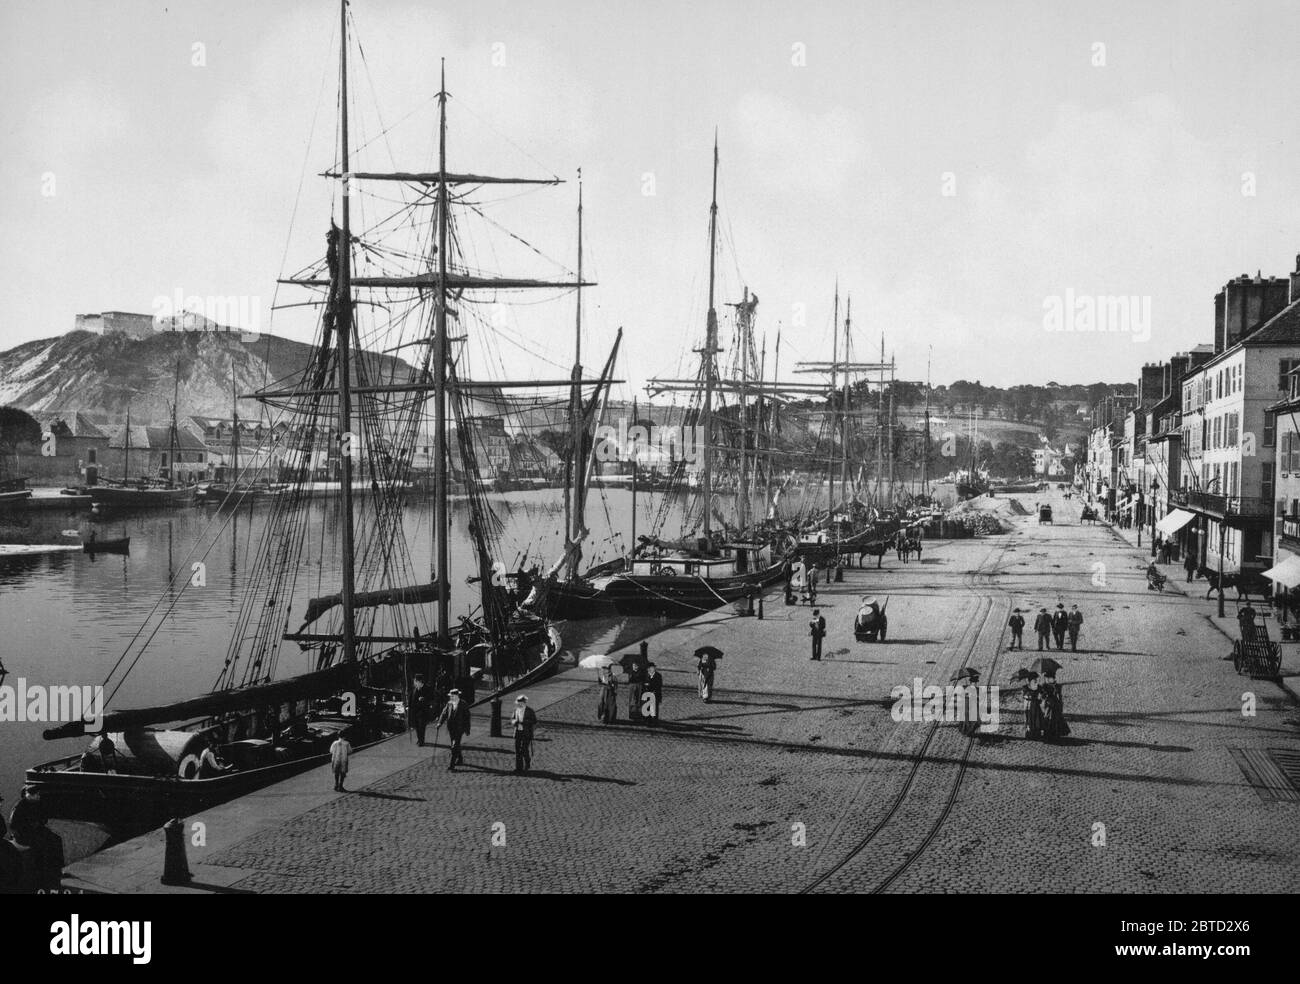 Quay Alex. III and commercial docks, Cherbourg, France ca. 1890-1900 Stock Photo